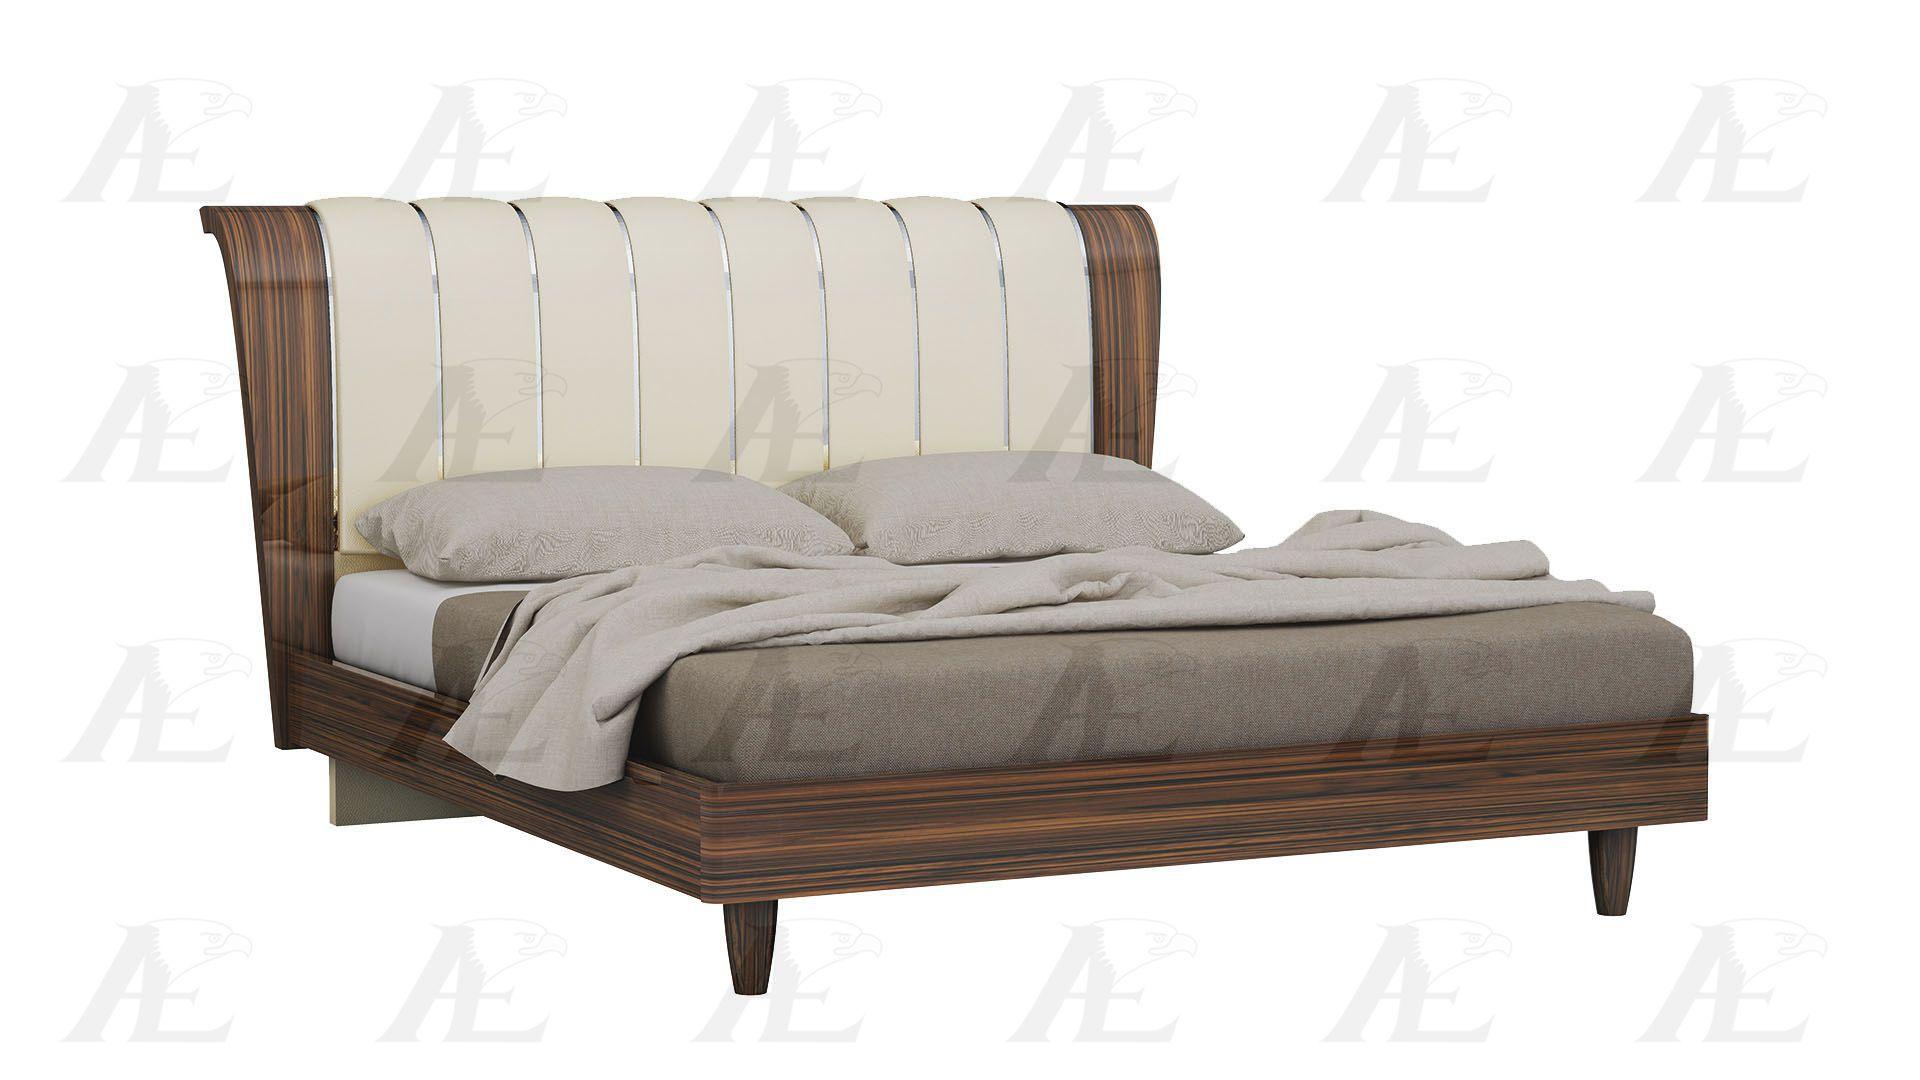 

    
American Eagle Furniture B-P101 Ivory Brown Rosewood Eastern King Size Platform Bed Lacquer finish
